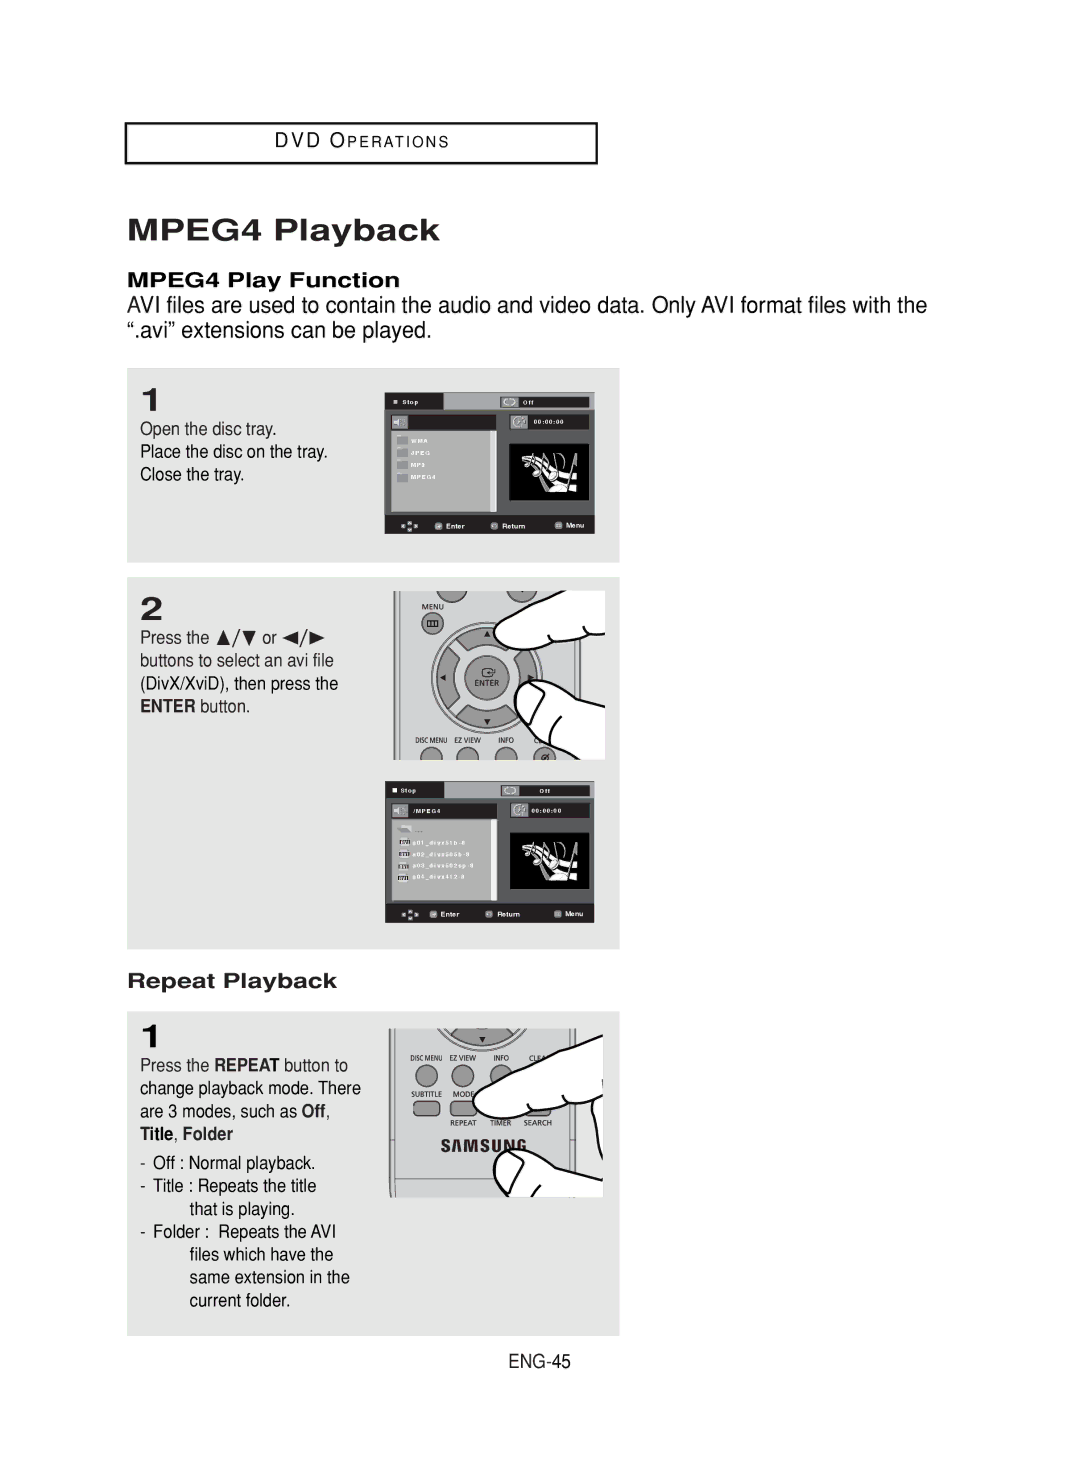 Samsung DVD-V9800 instruction manual MPEG4 Playback, MPEG4 Play Function, Repeat Playback, ENG-45 